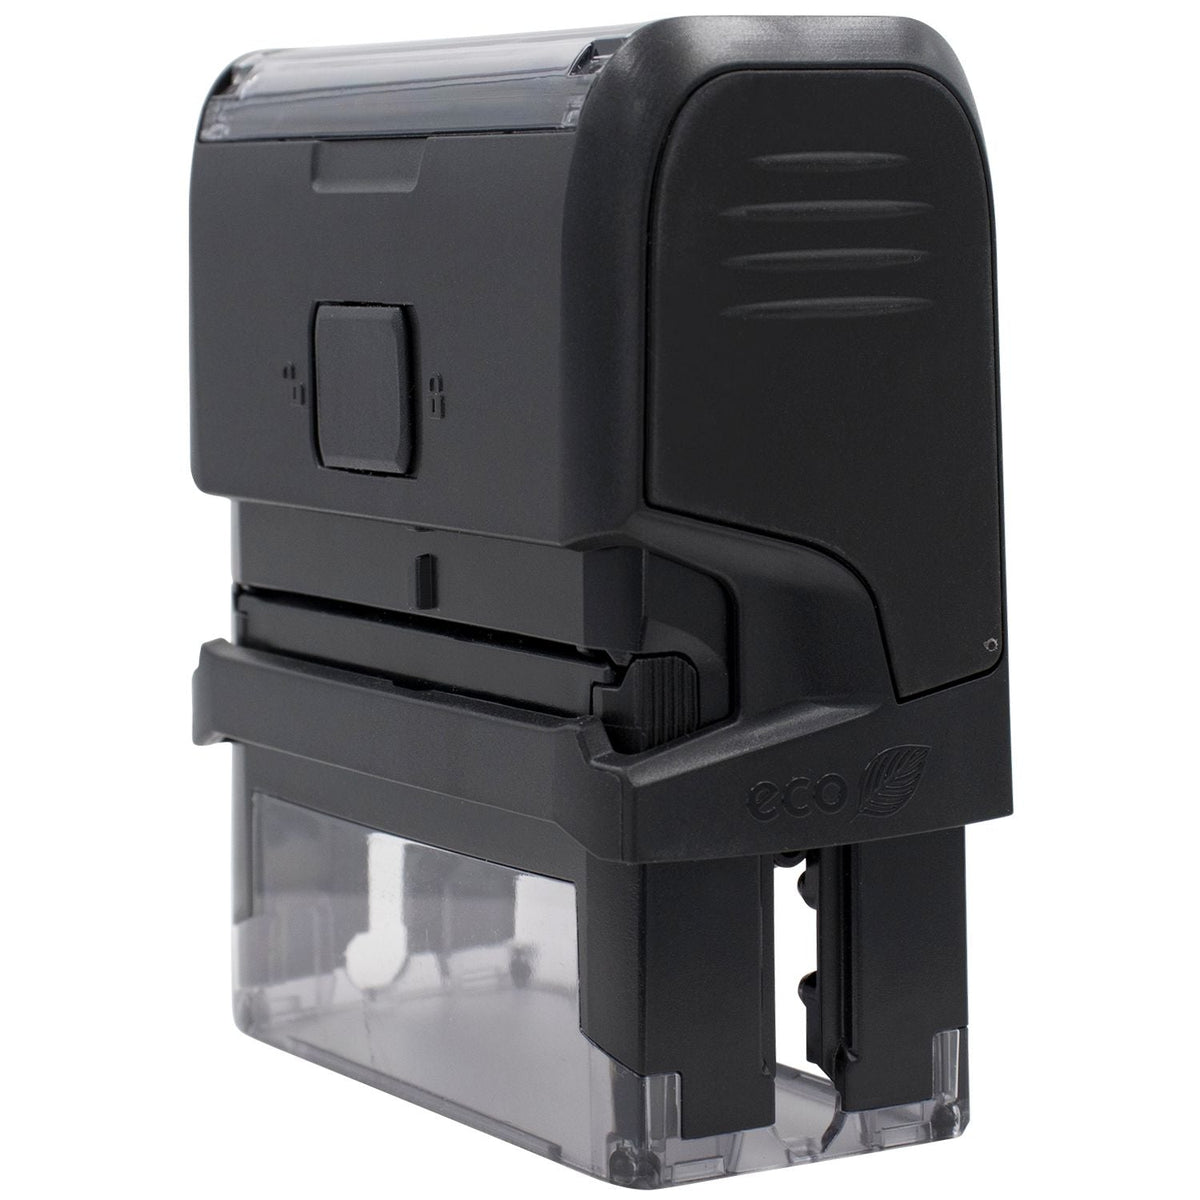 Self-Inking Lets review this with Lamp Stamp Side View Angle